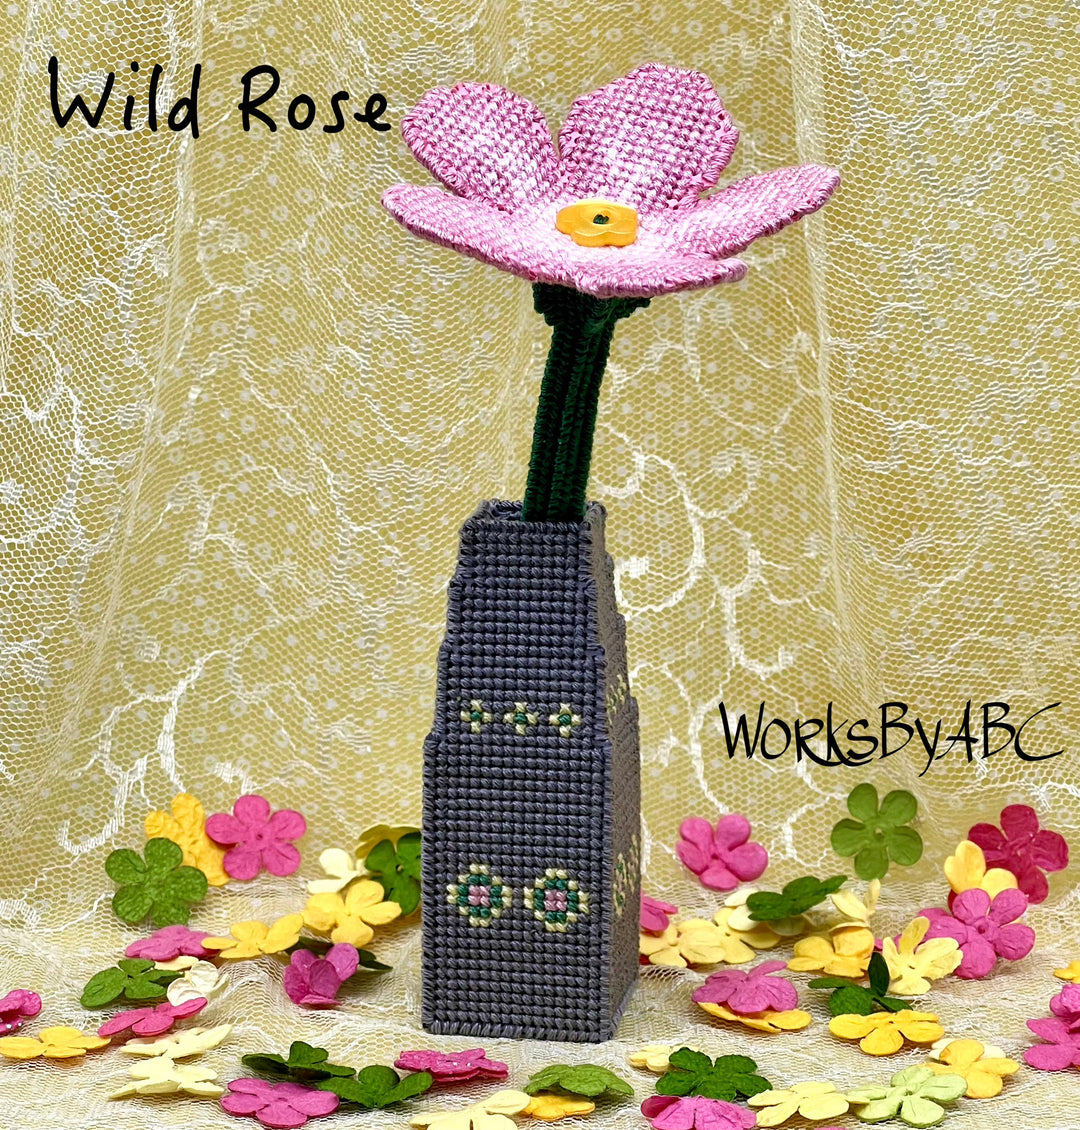 Wild Rose (includes perforated paper & button!) | WorksByABC